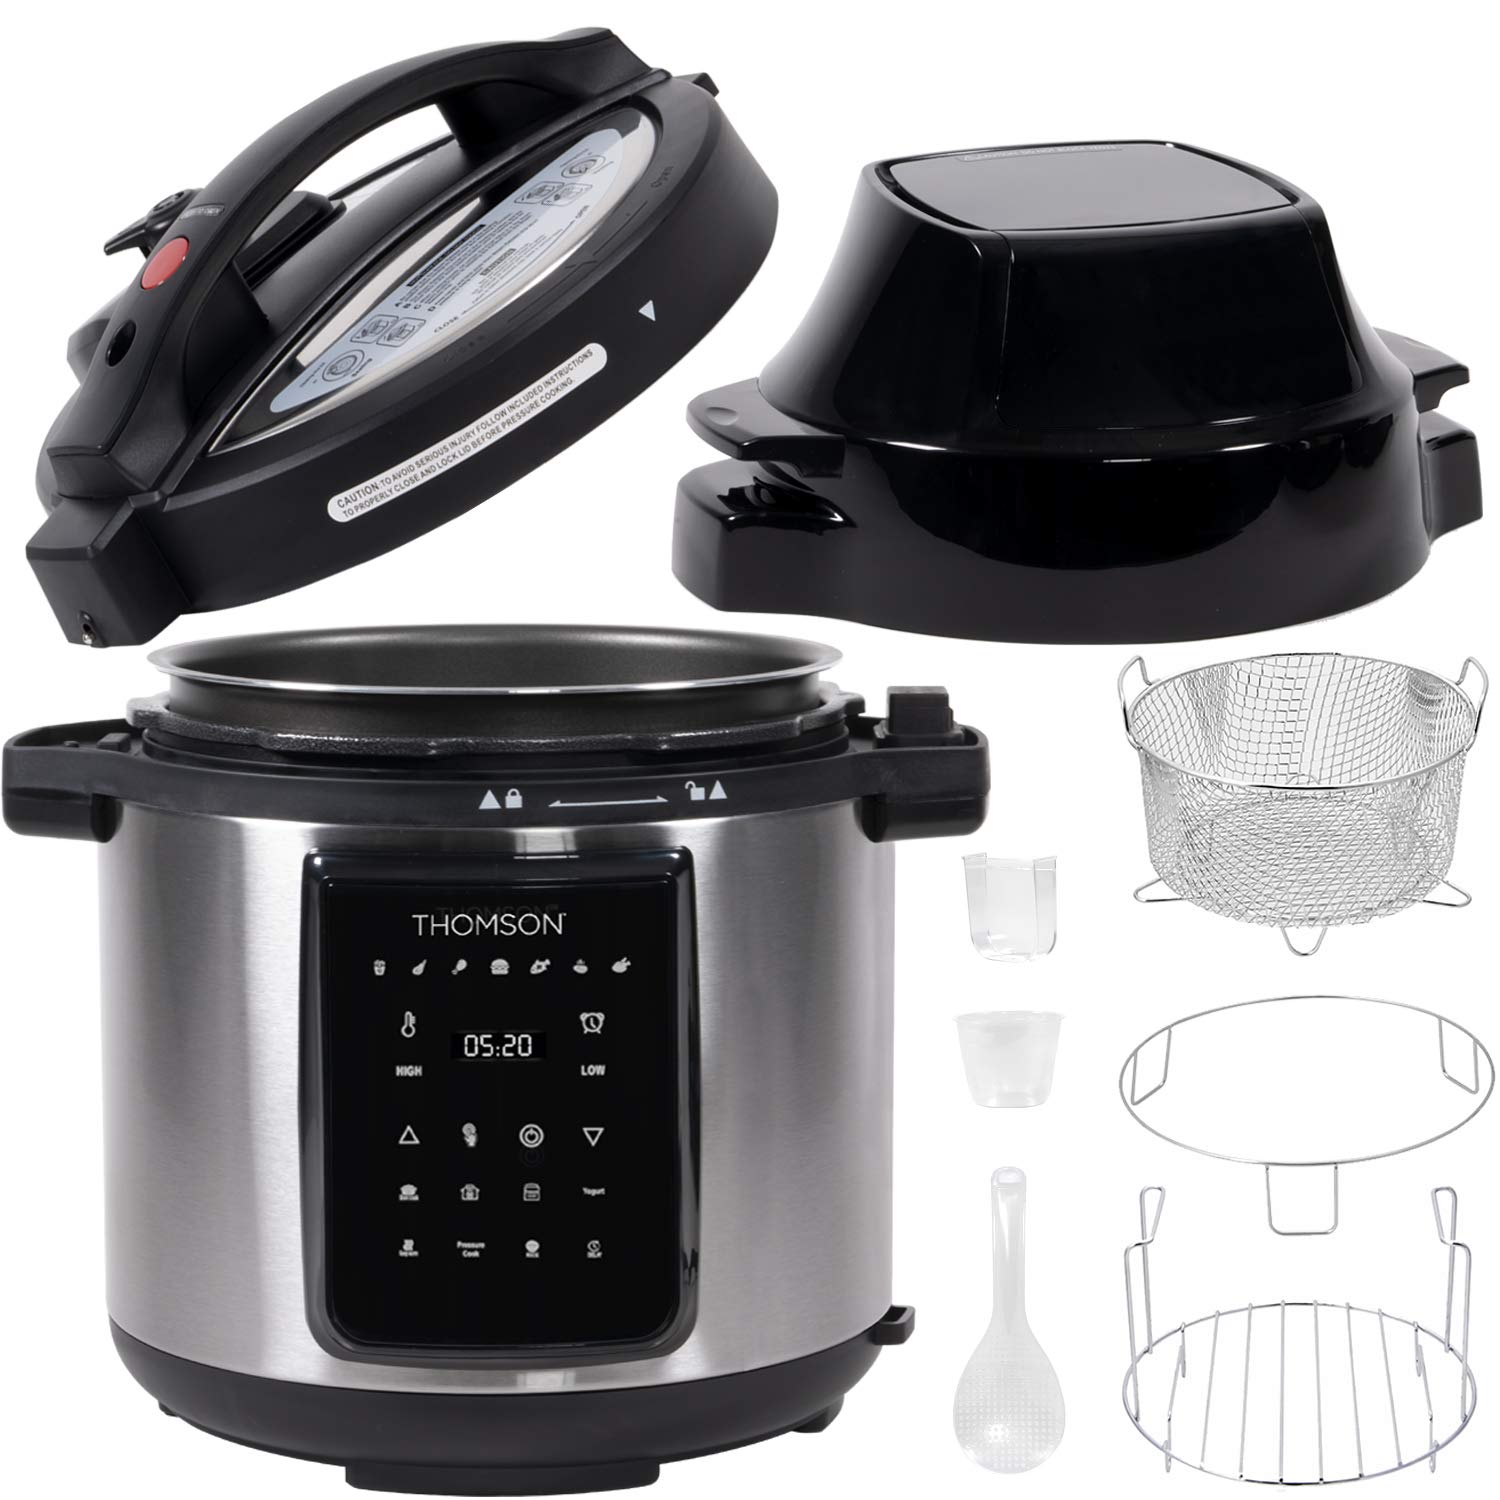 Thomson TFPC607 9-in-1 Pressure Cooker and Air Fryer with Dual Lid, Slow Cooker and More, Digital Touch Display, 6.5 QT Capacity, Included Cooking Accessories - Stainless Steel